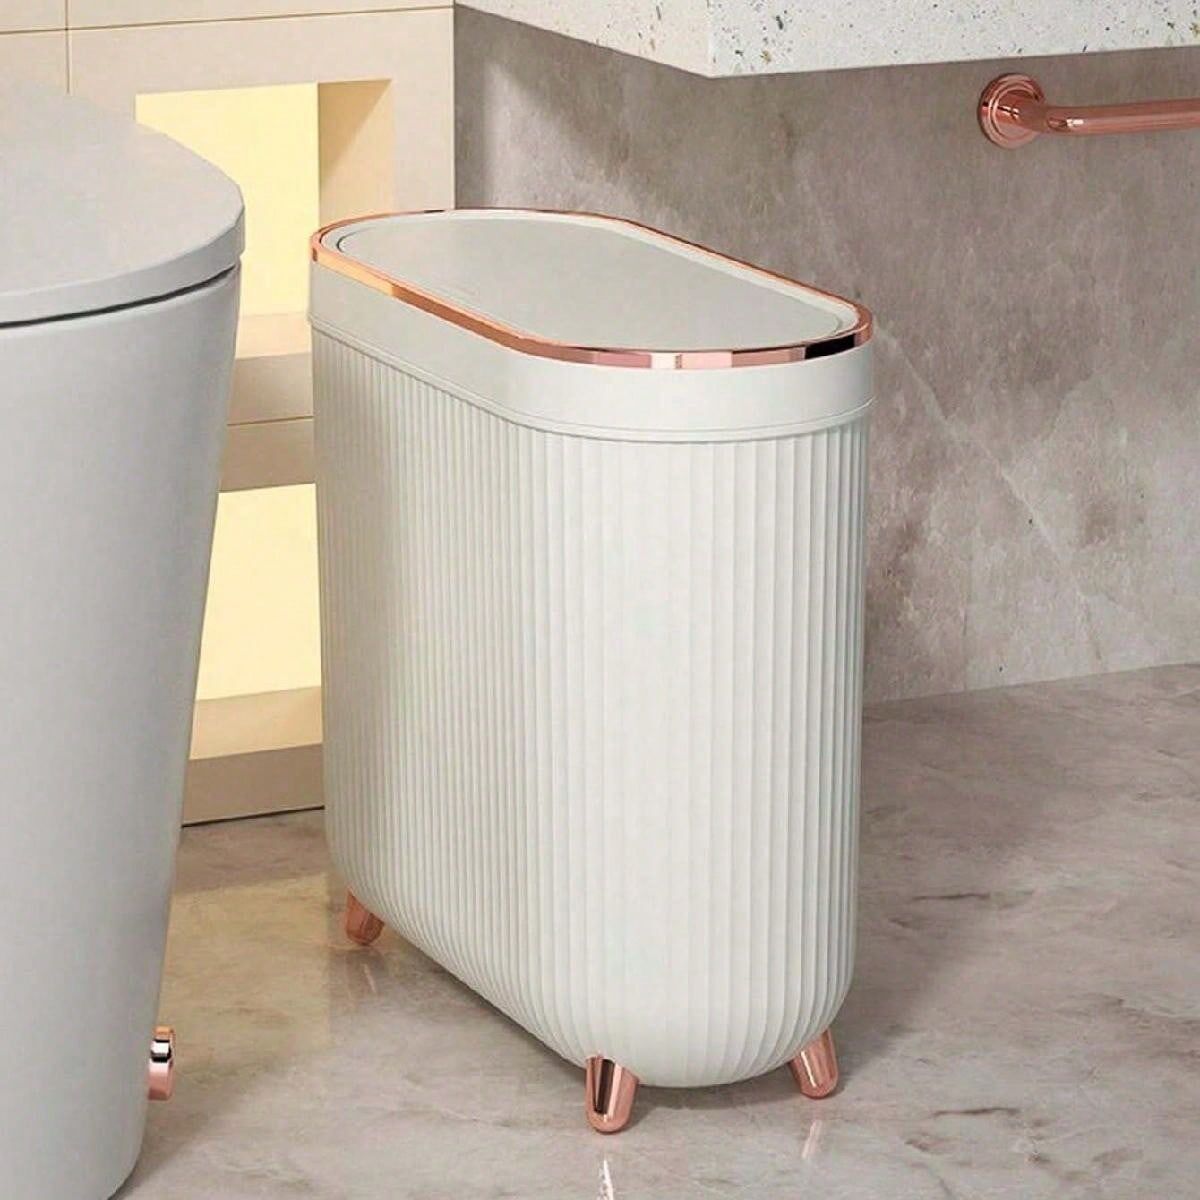 SHEIN 12L Pedal-Operated Trash Can, Odor-Sealing & Waterproof, Stylish Golden Detailing, Versatile For Home, Office, Or Bathroom Use Bathroom Garbage Can Cleat With Cover Toilet Household Light Luxury Narrow Small Sealed Cylinder Living Room Bedroom Bathr